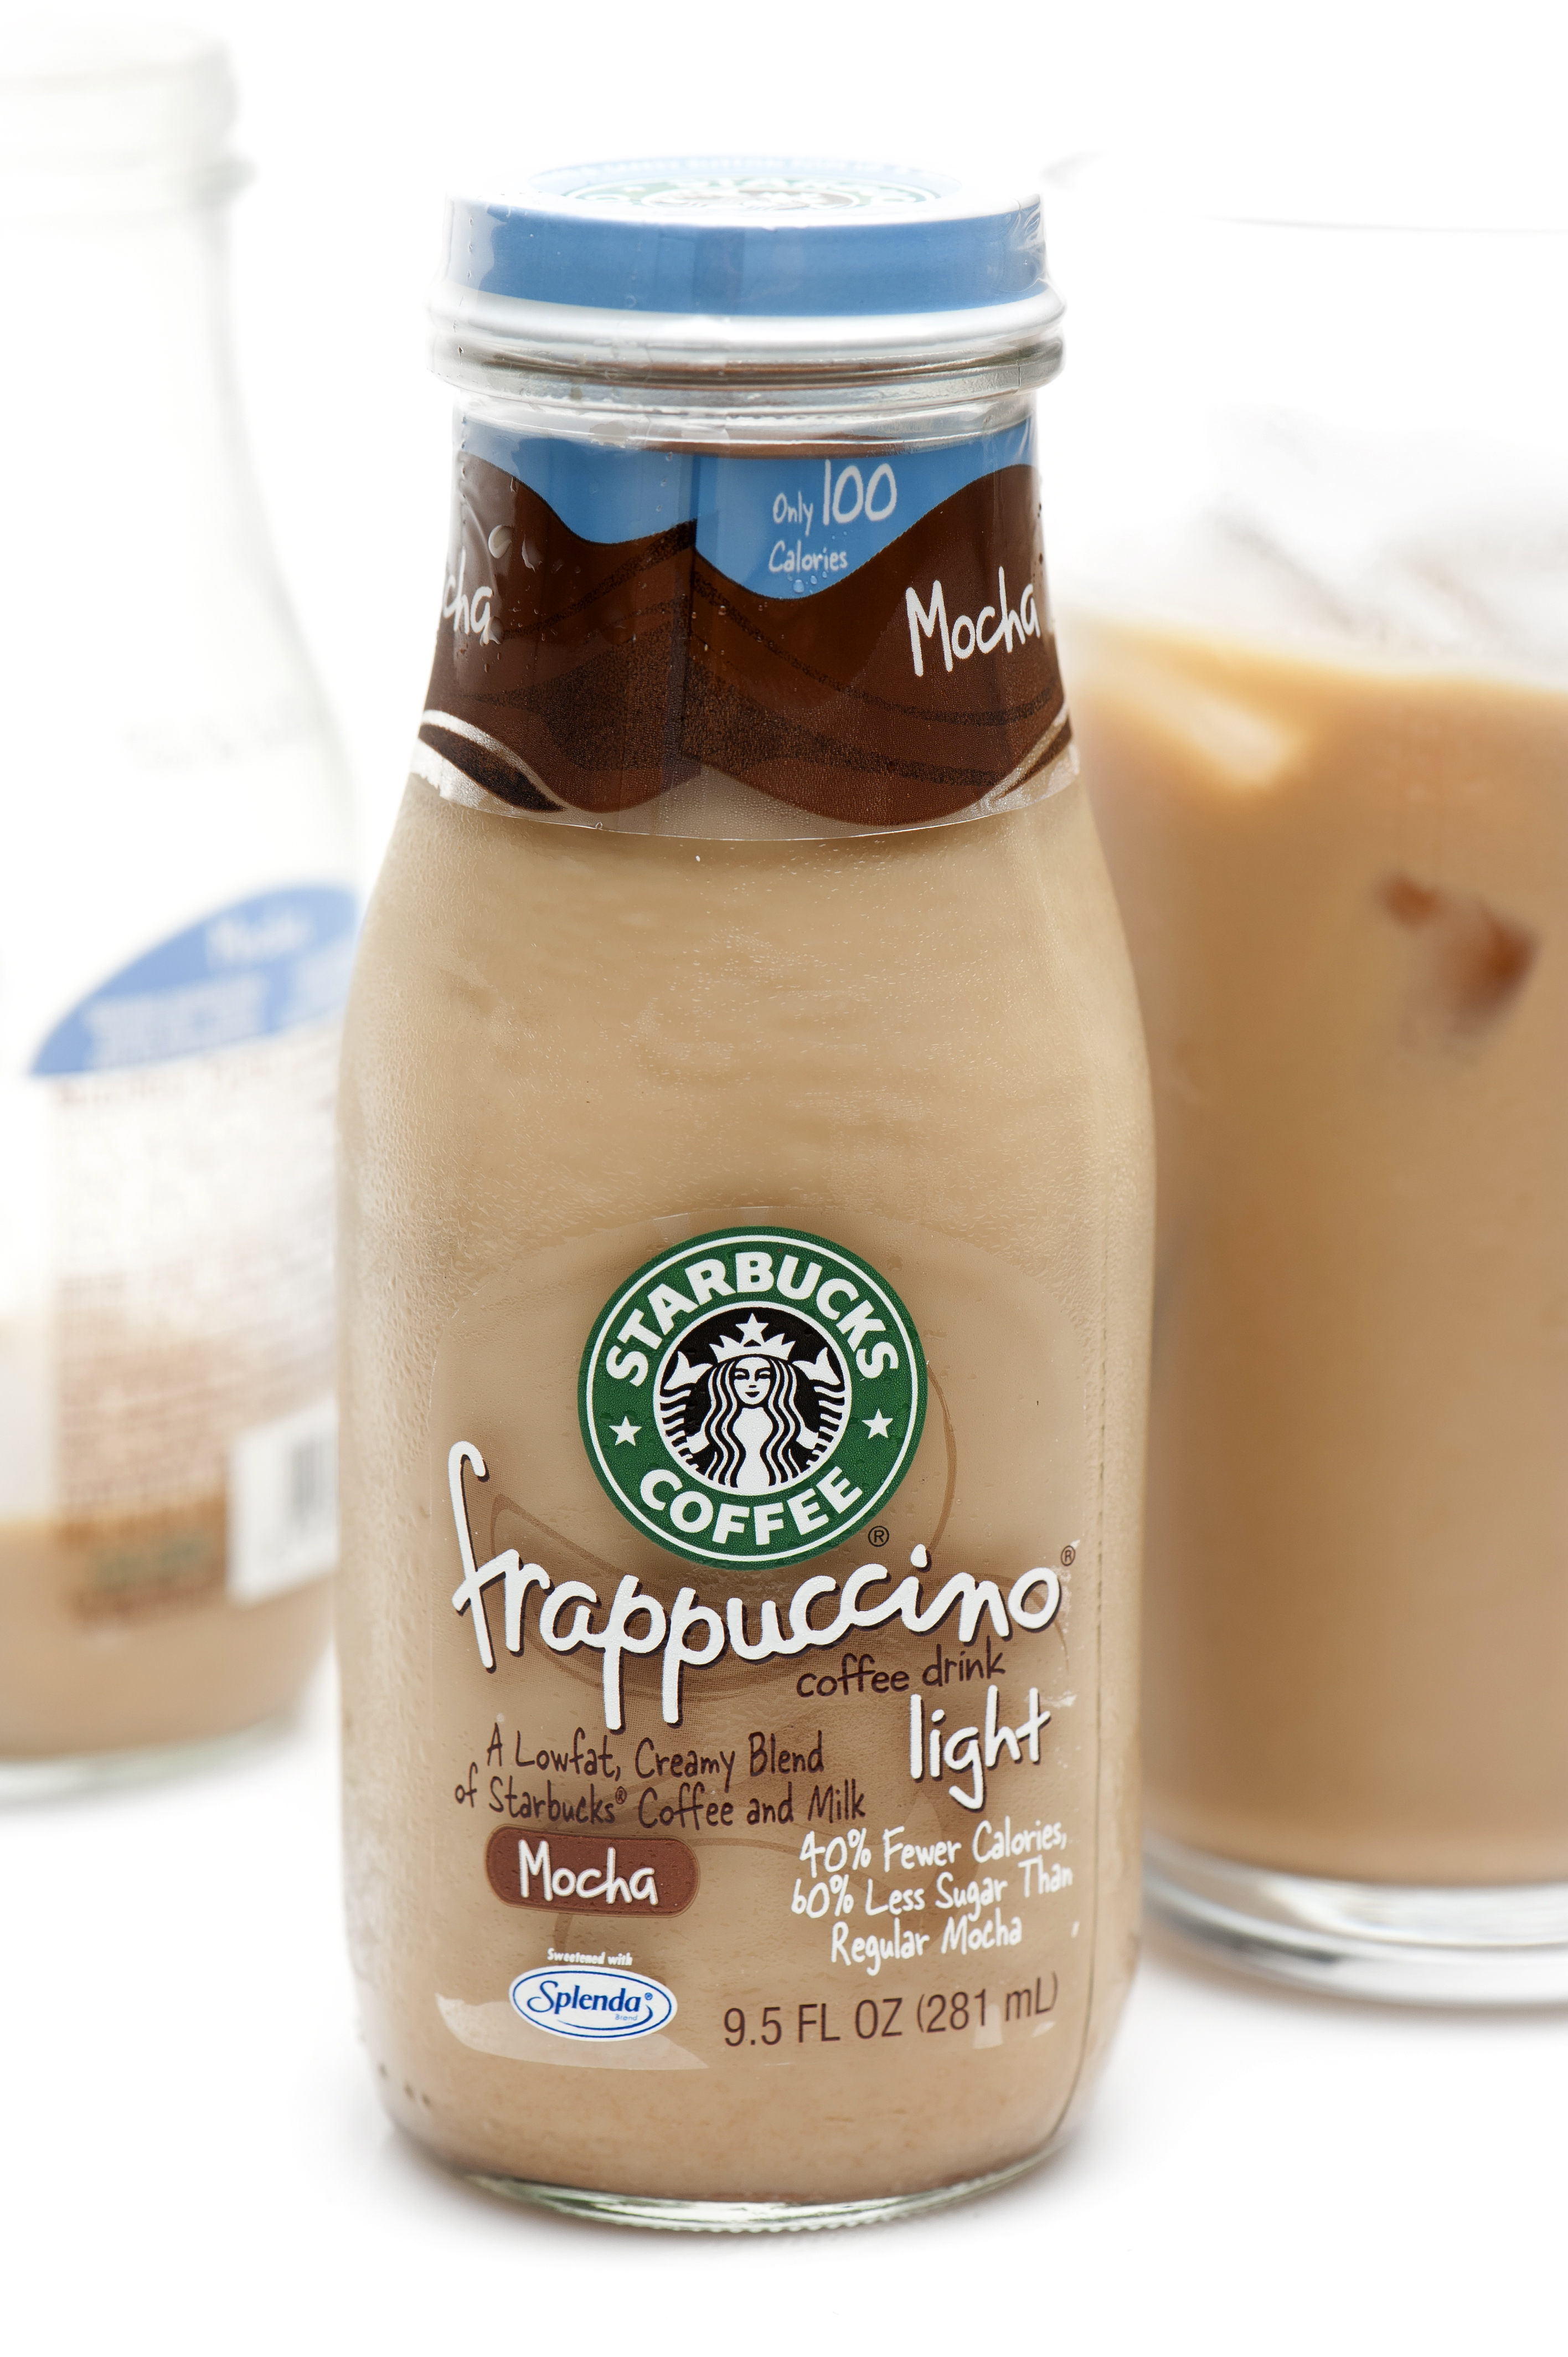 You Should Buy the New Birthday Cake Frappuccino, but What About SBUX Stock?